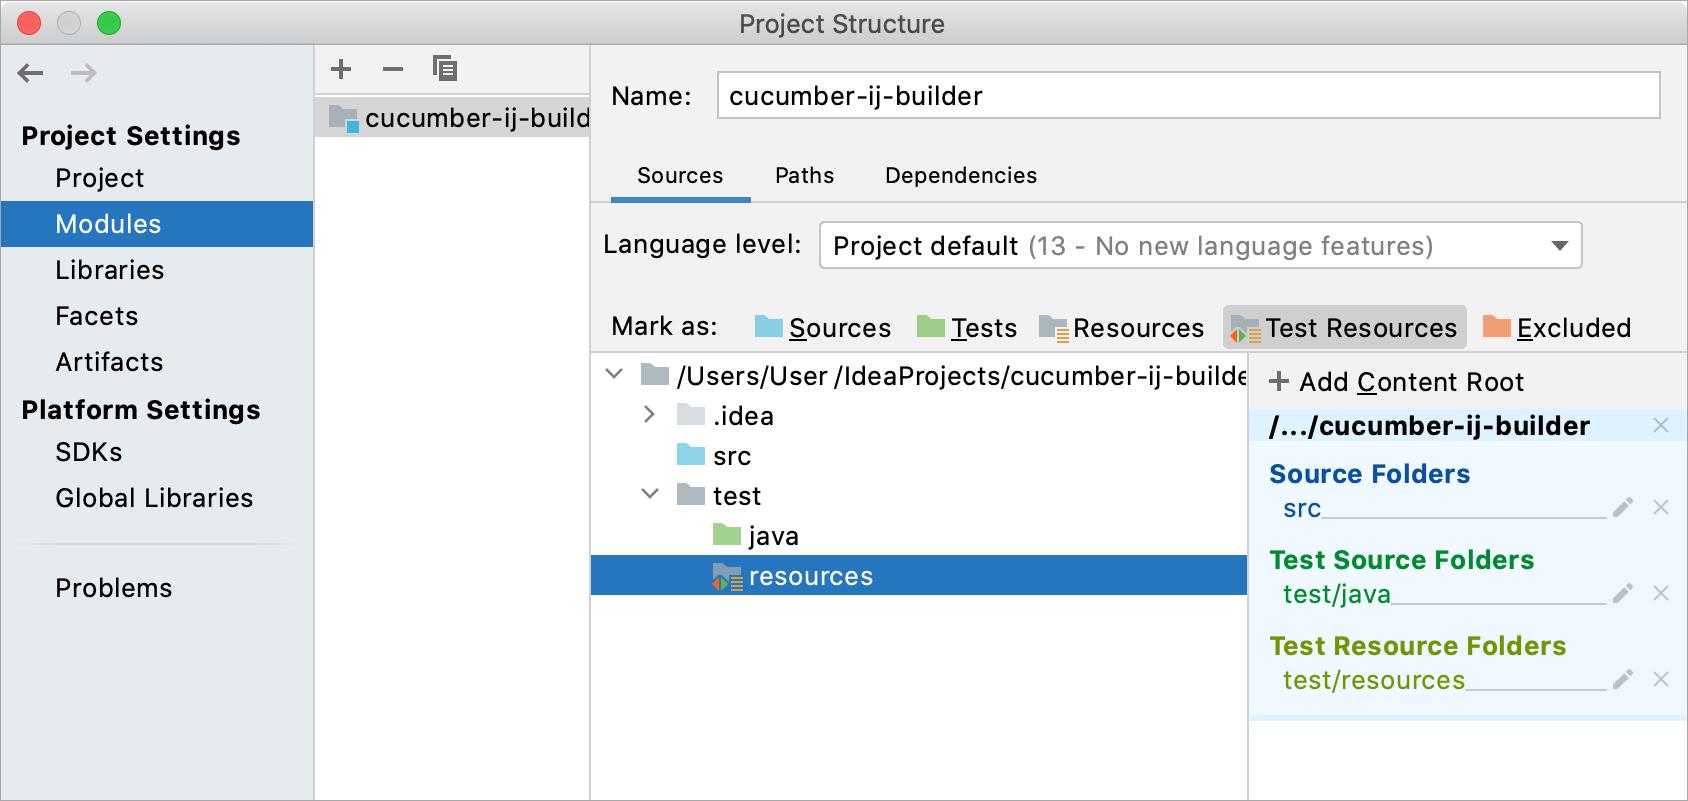 Test Resources Root created in the Project Structure dialog